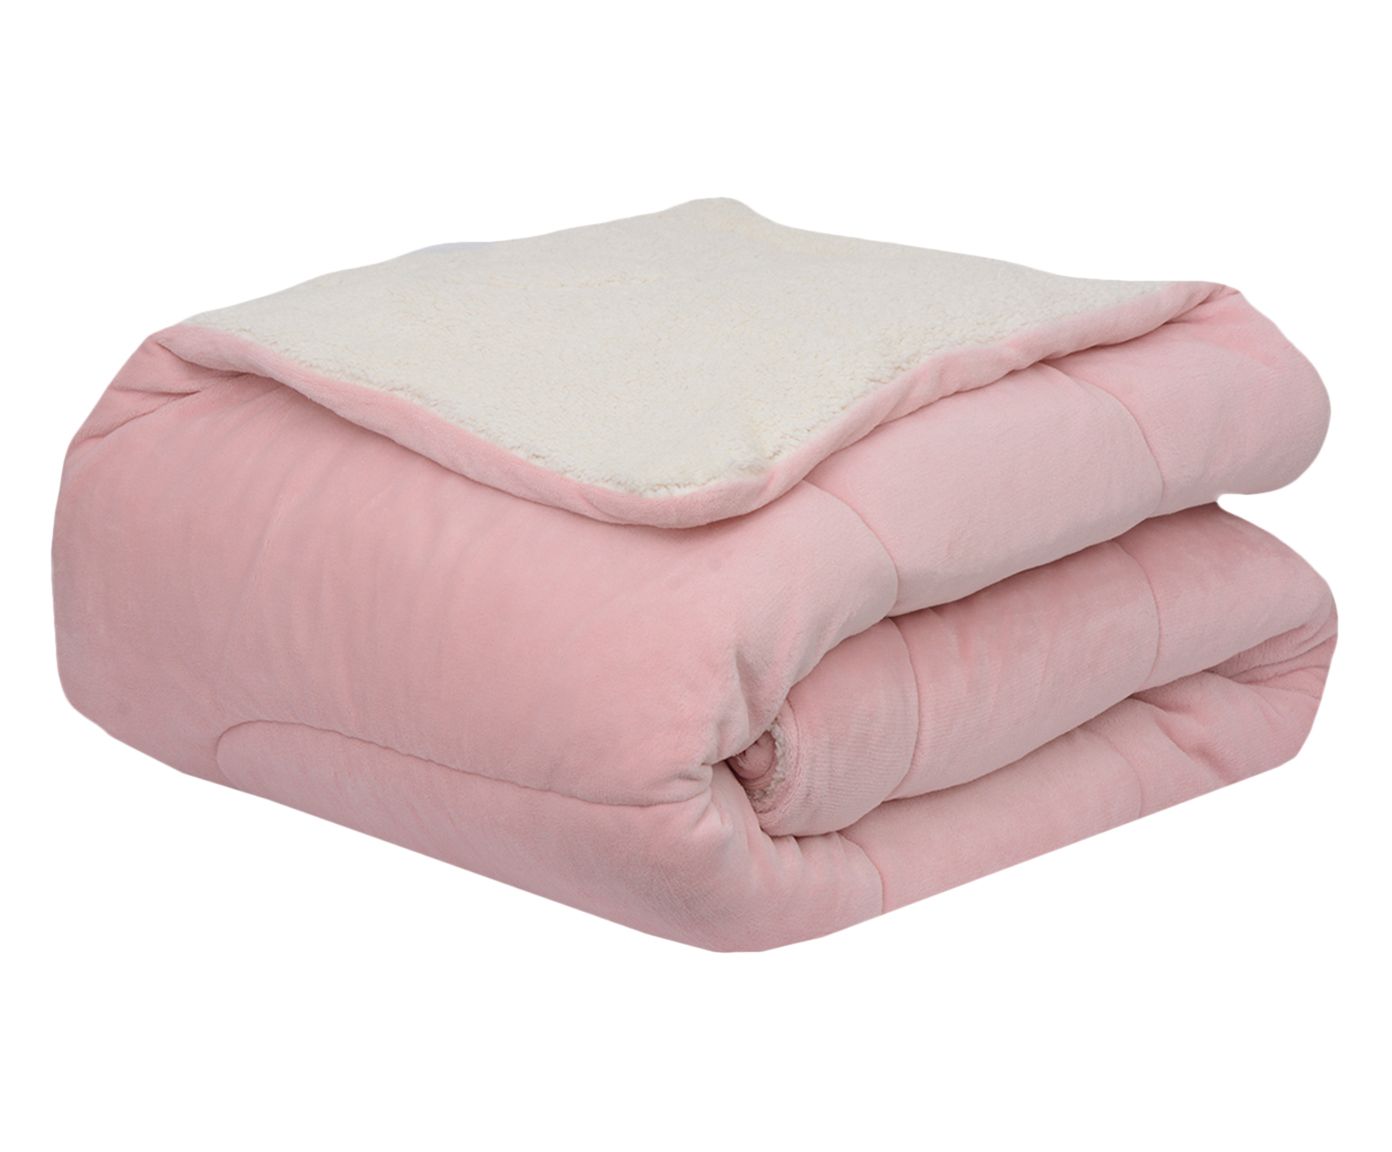 Cobre-Leito Flannel Sherpa Rosê 130G/M² - Queen Size | Westwing.com.br